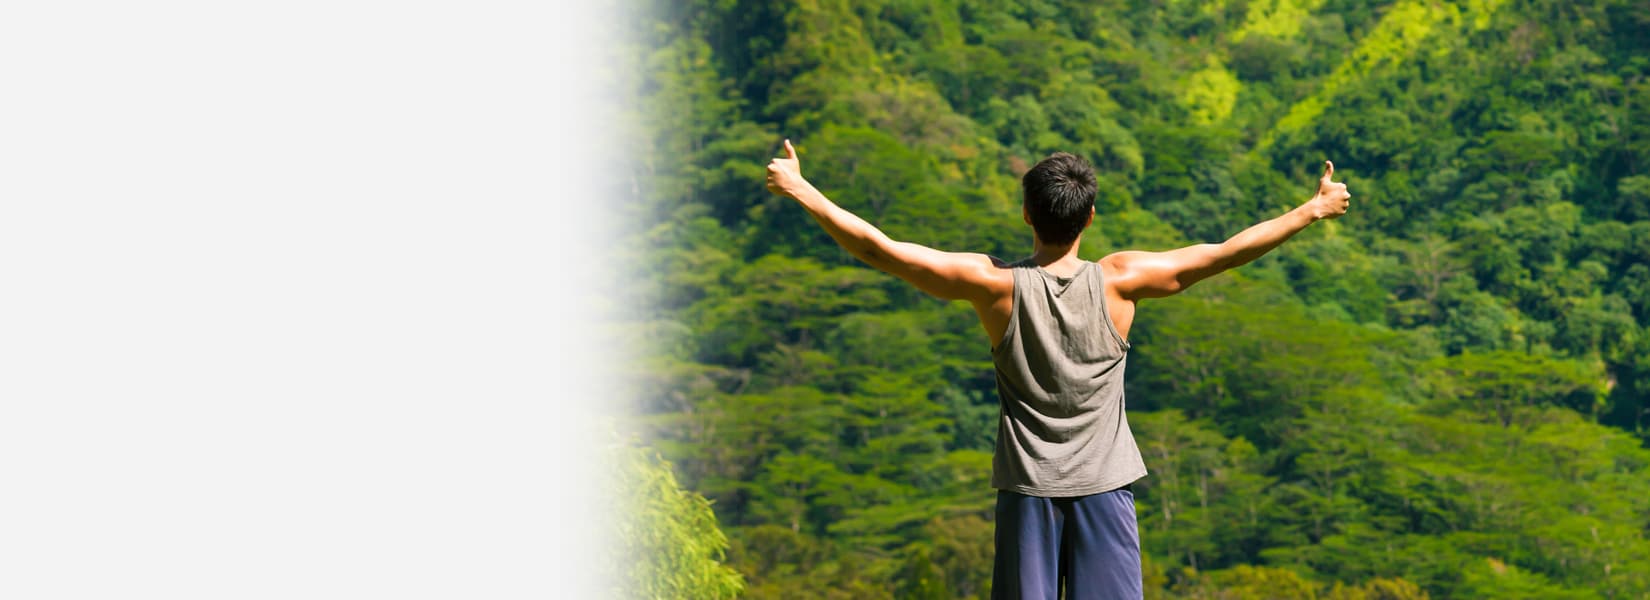 man with arms outstretched in green wilderness